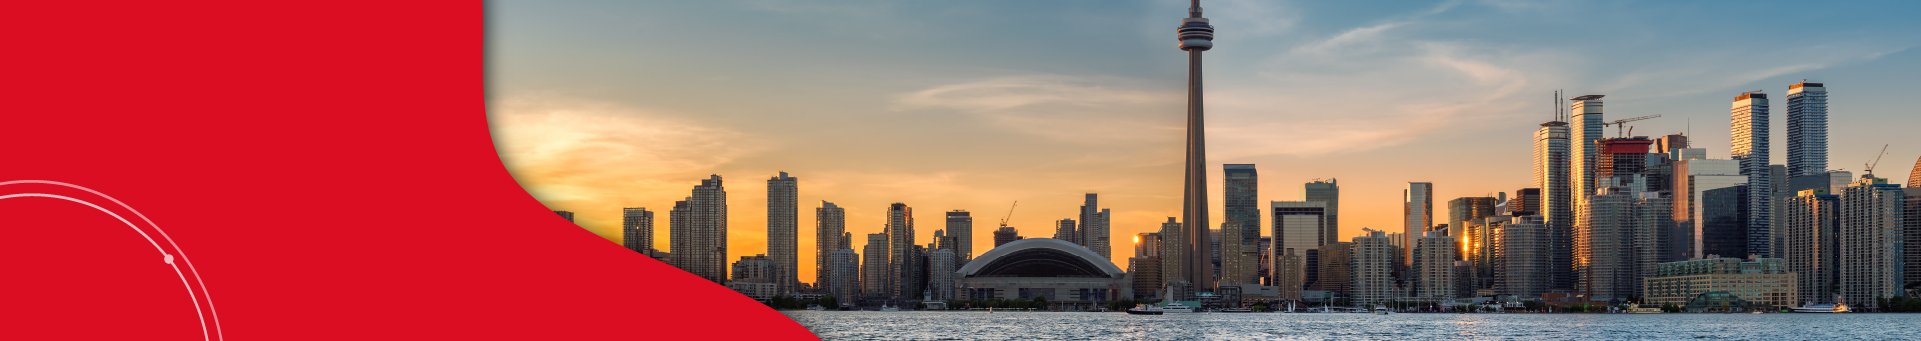 If you'd like to travel to Canada, you'll need a Canada Visitor Visa, or Canadian Tourist Visa. Find out more about your visa options and the visa requirements.